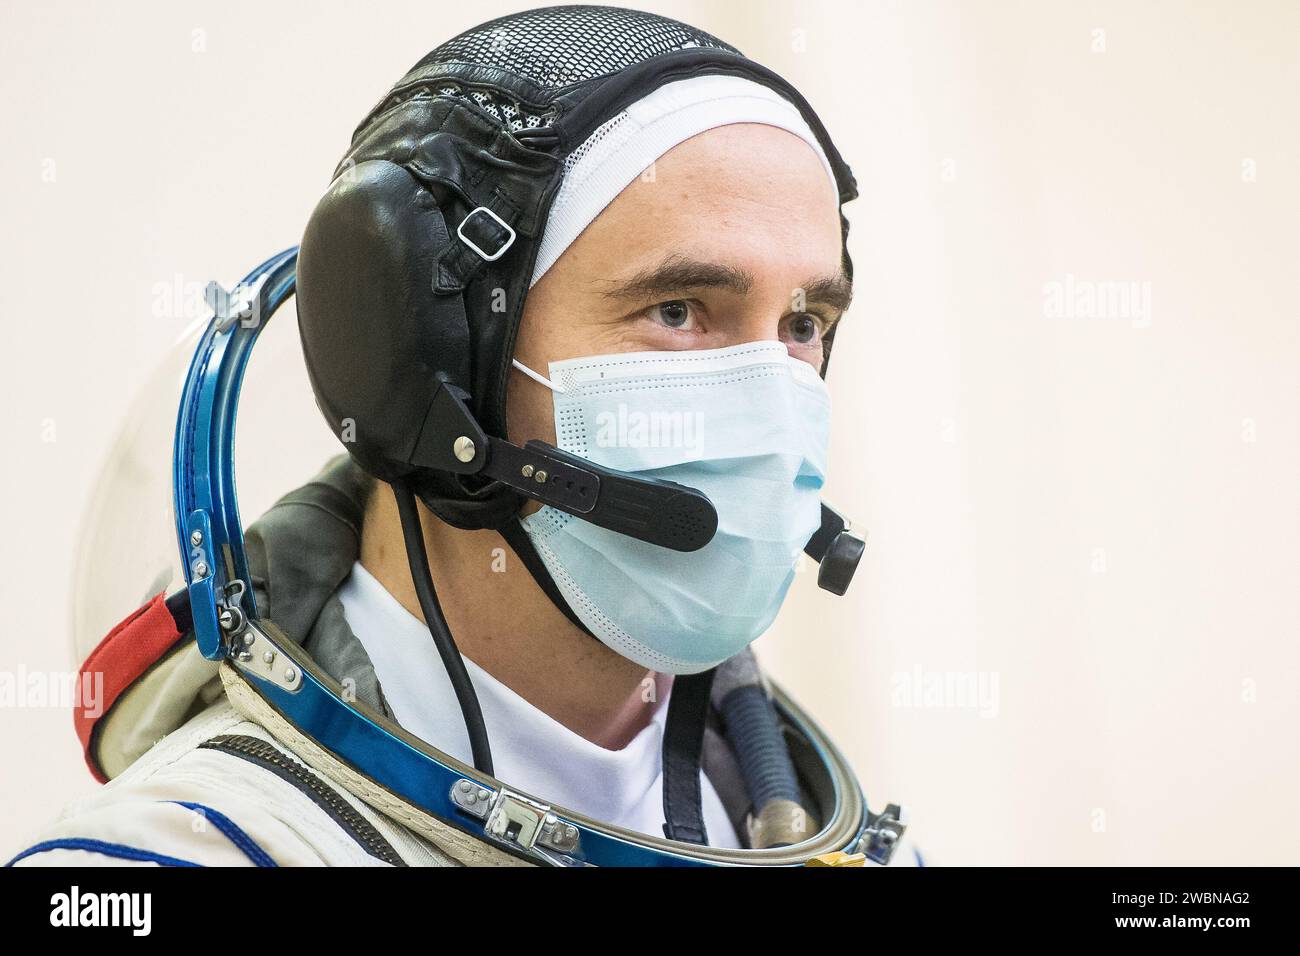 Expedition 64 backup crew member Petr Dubrov of Roscosmos arrives for Soyuz qualification exams Tuesday, Sept. 22, 2020 at the Gagarin Cosmonaut Training Center (GCTC) in Star City, Russia. Stock Photo